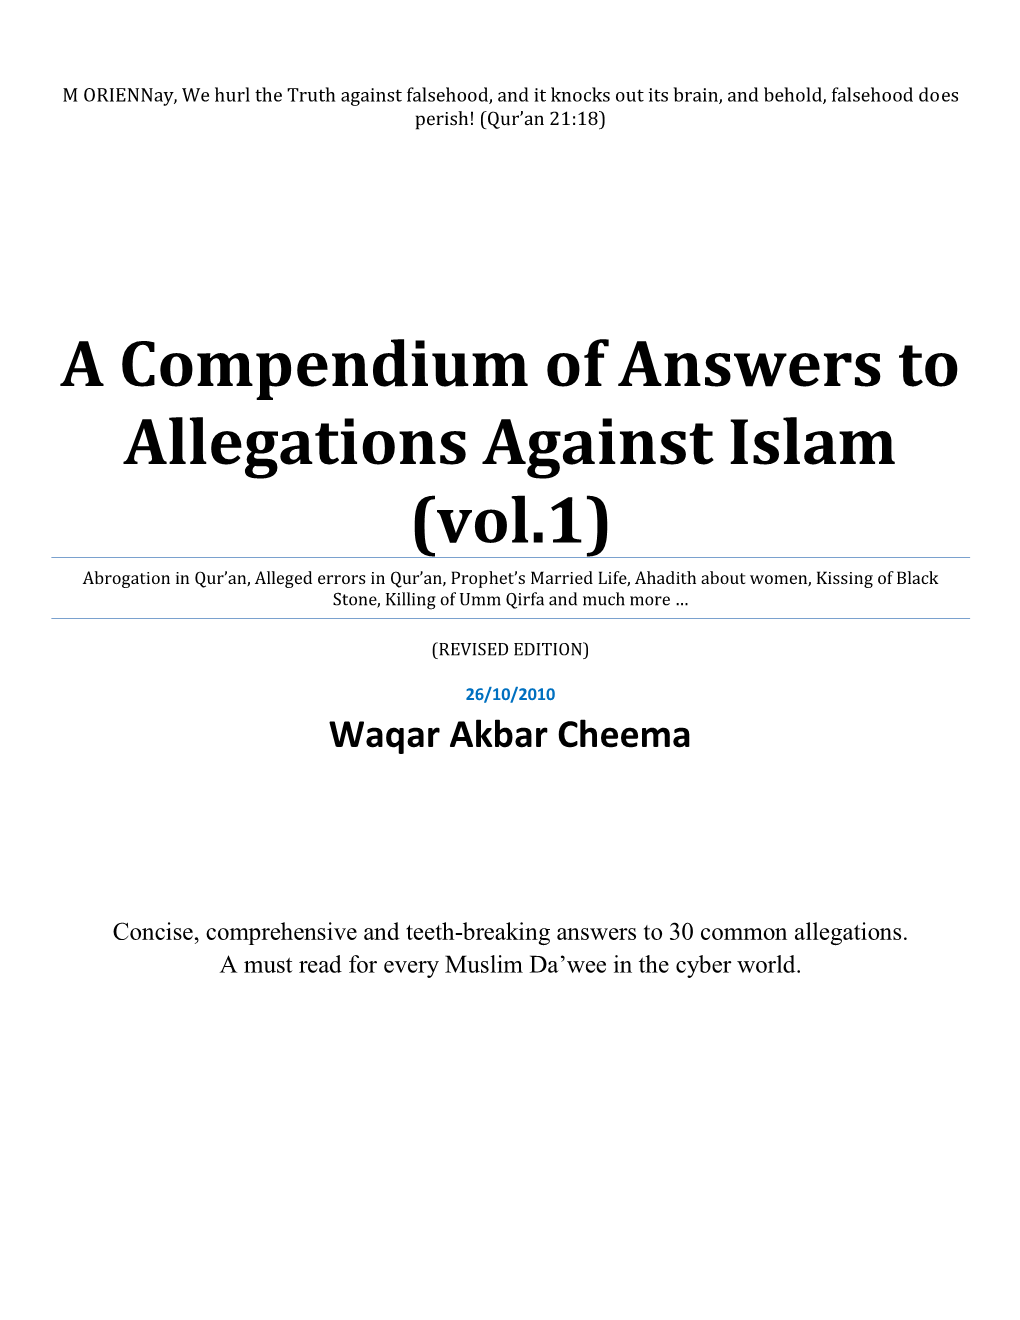 A Compendium of Answers to Allegations Against Islam (Vol.1)